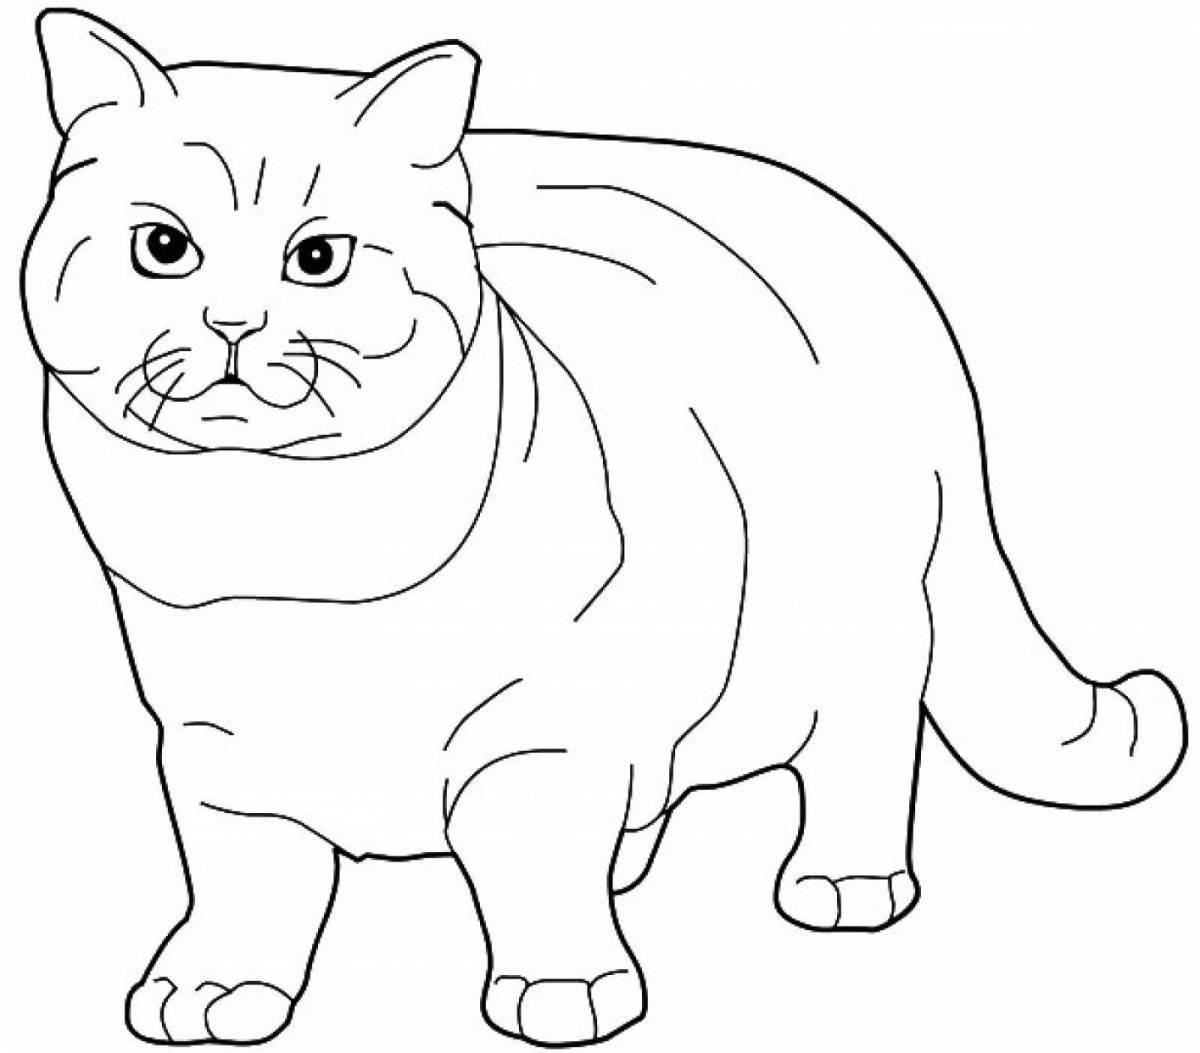 Charming scottish fold cat coloring book